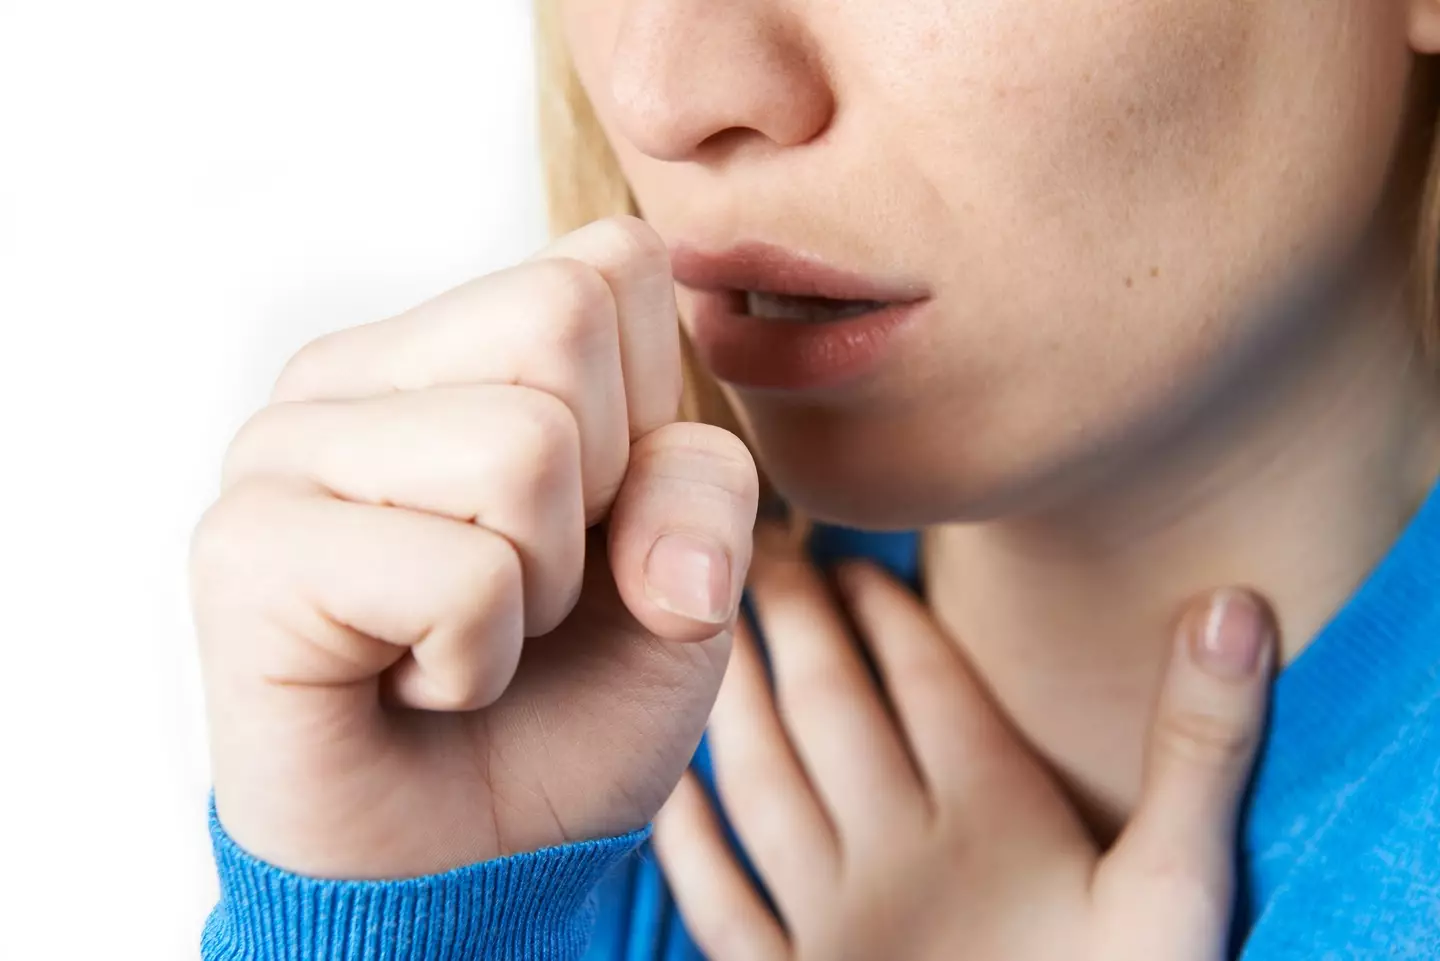 There's been a surge in whooping cough cases across the UK. (Highwaystarz-Photography / Getty Images)